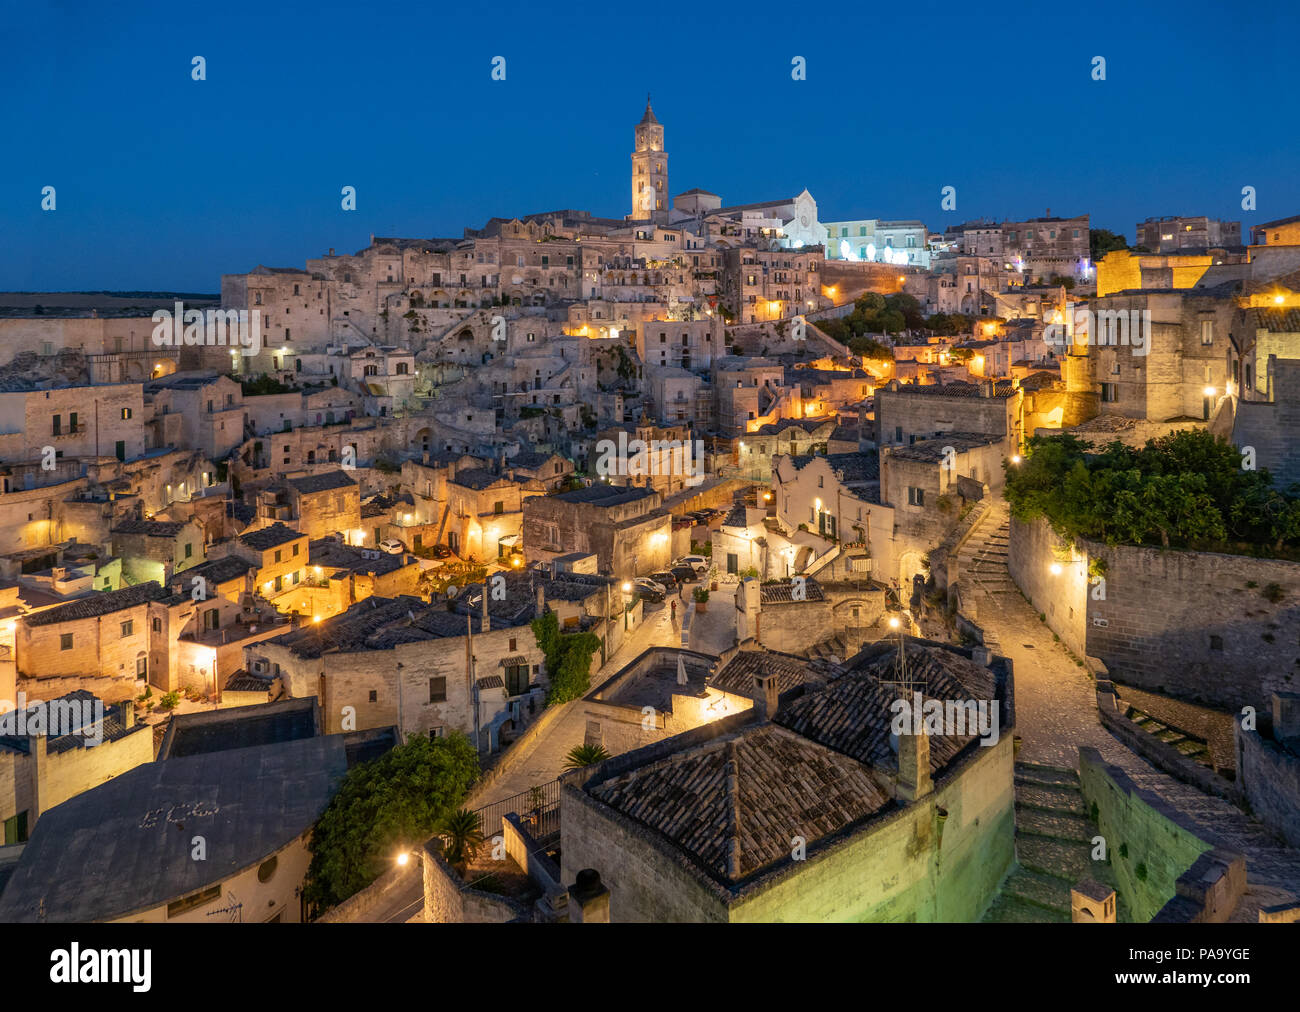 Matera (Basilicata) - The historic center of the wonderful stone city of southern Italy, a tourist attraction for the famous 'Sassi' old town. Stock Photo